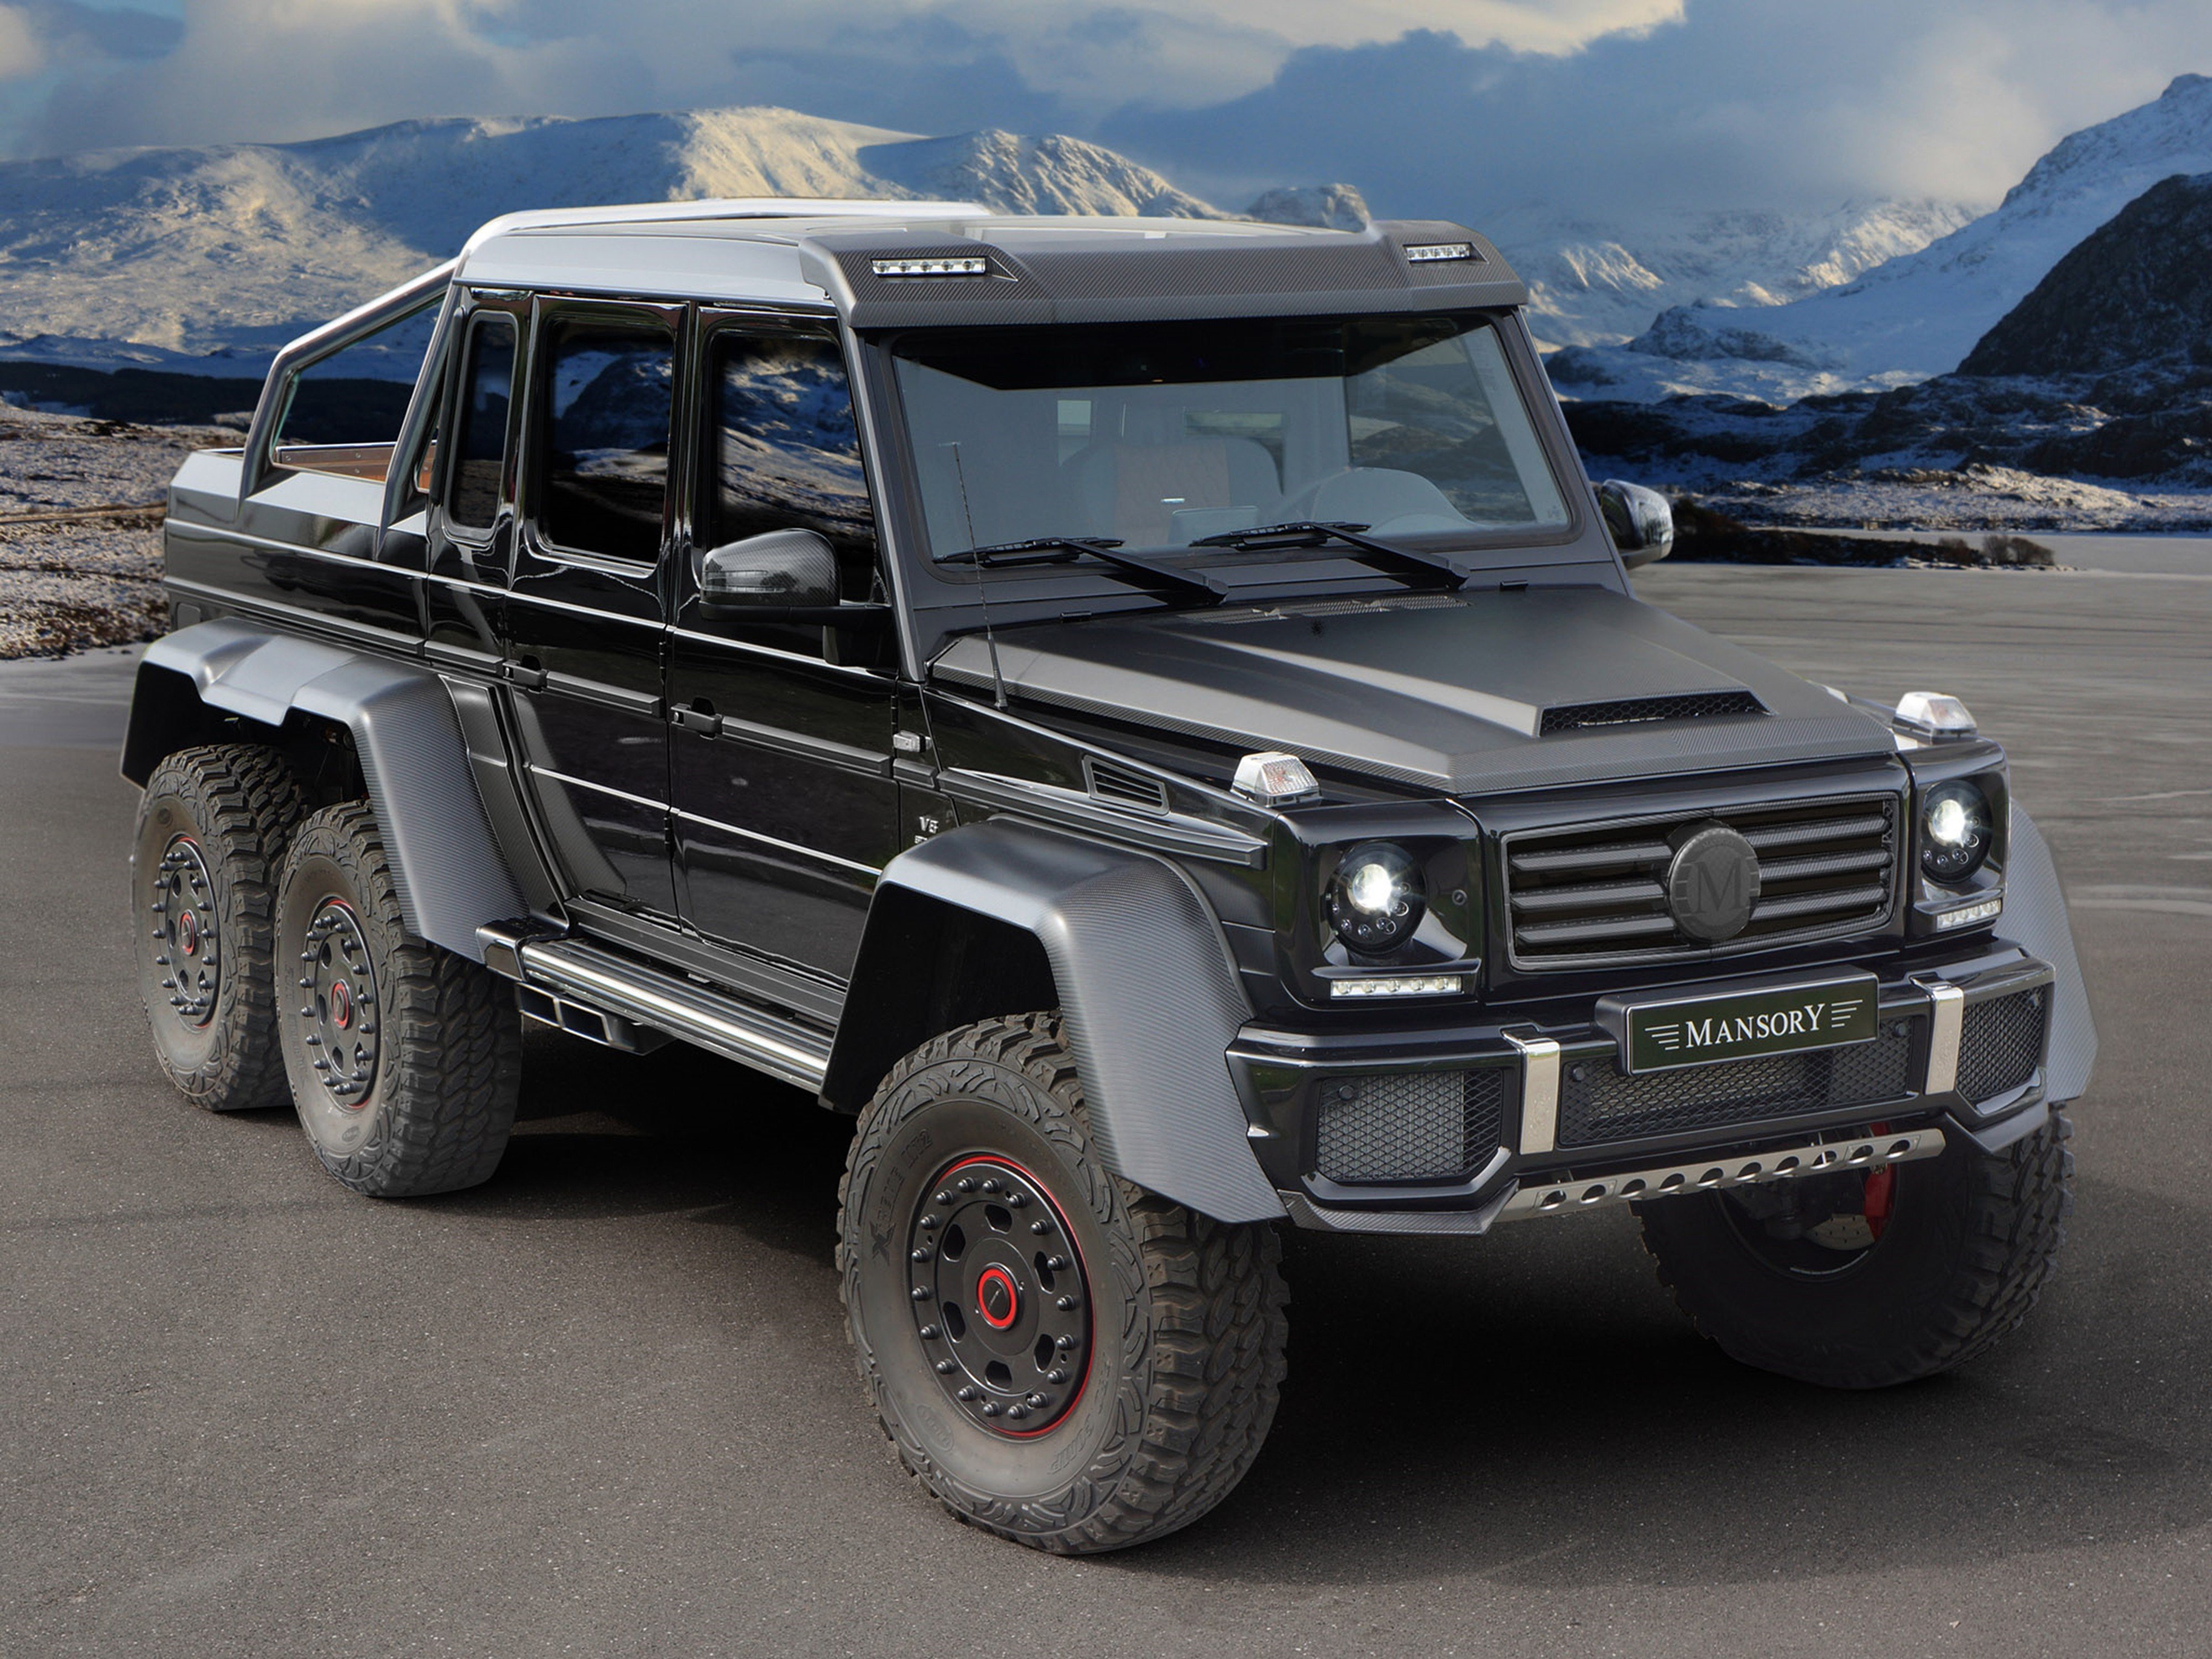 mansory, Amg, Mercedes benz, G class, Tunning, Off road, Car, Germany, 6x6 2014, 4000x3000,  2 Wallpaper